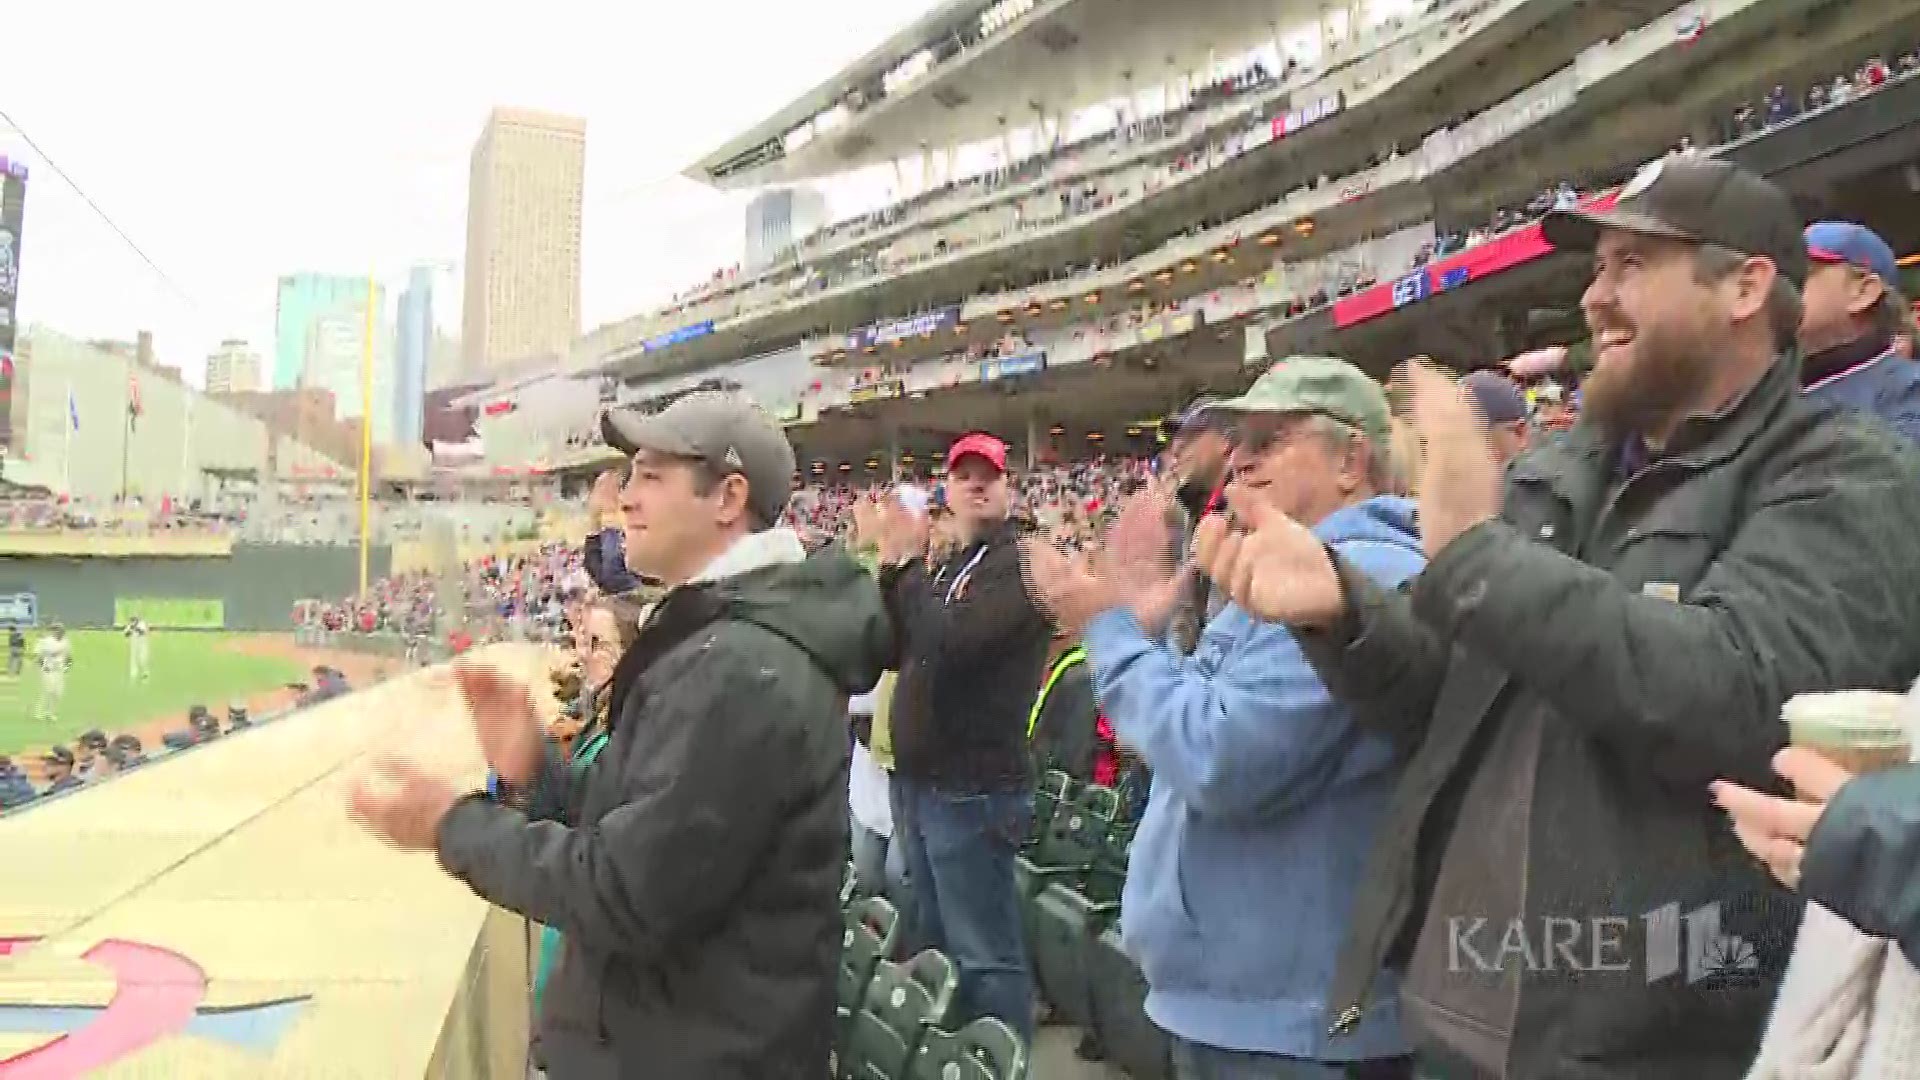 Twins fans gave Joe Mauer an emotional sendoff at what was likely his final game Sunday, even though he hasn't officially decided whether he's retiring. https://kare11.tv/2xNrMr4